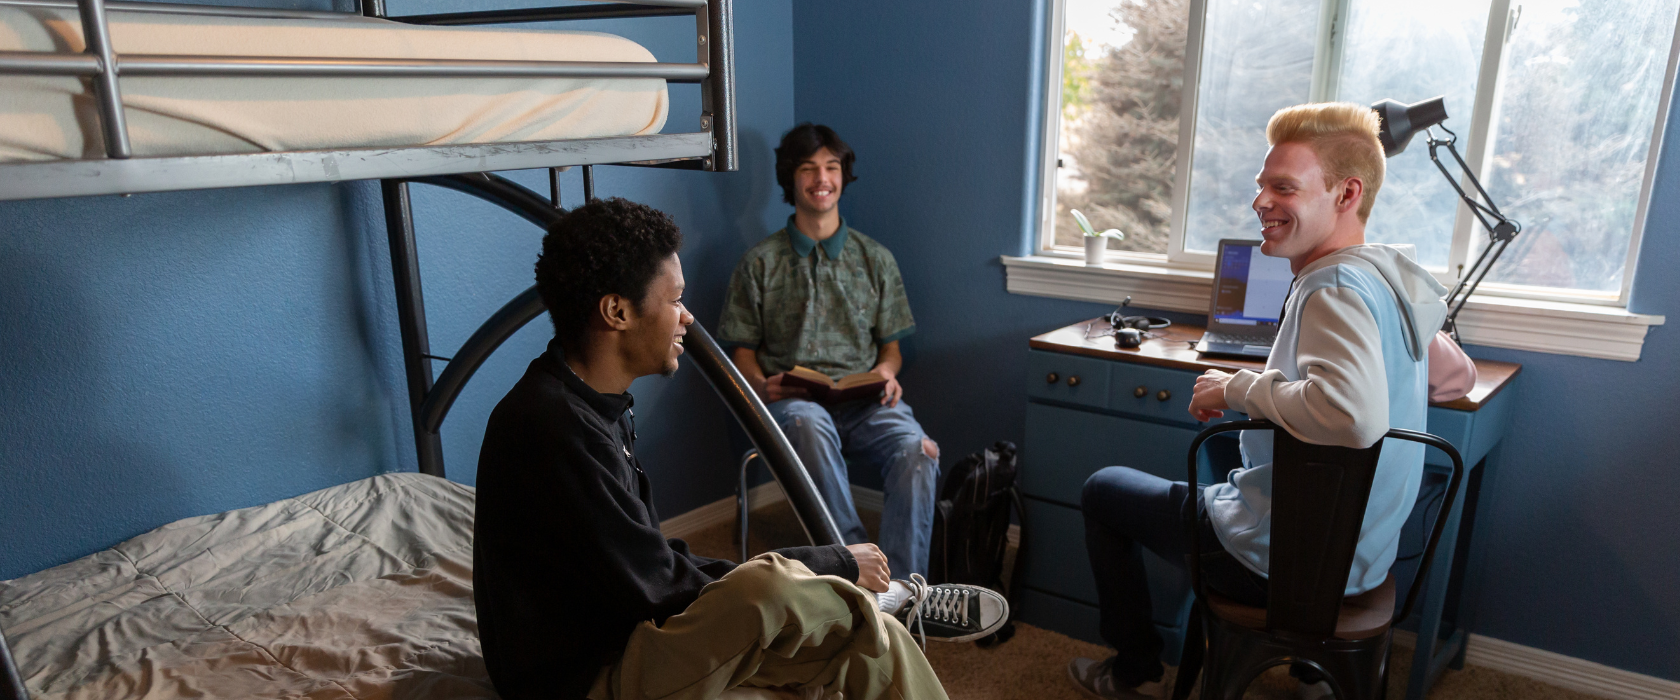 College boys sit and chat in their dorm room.